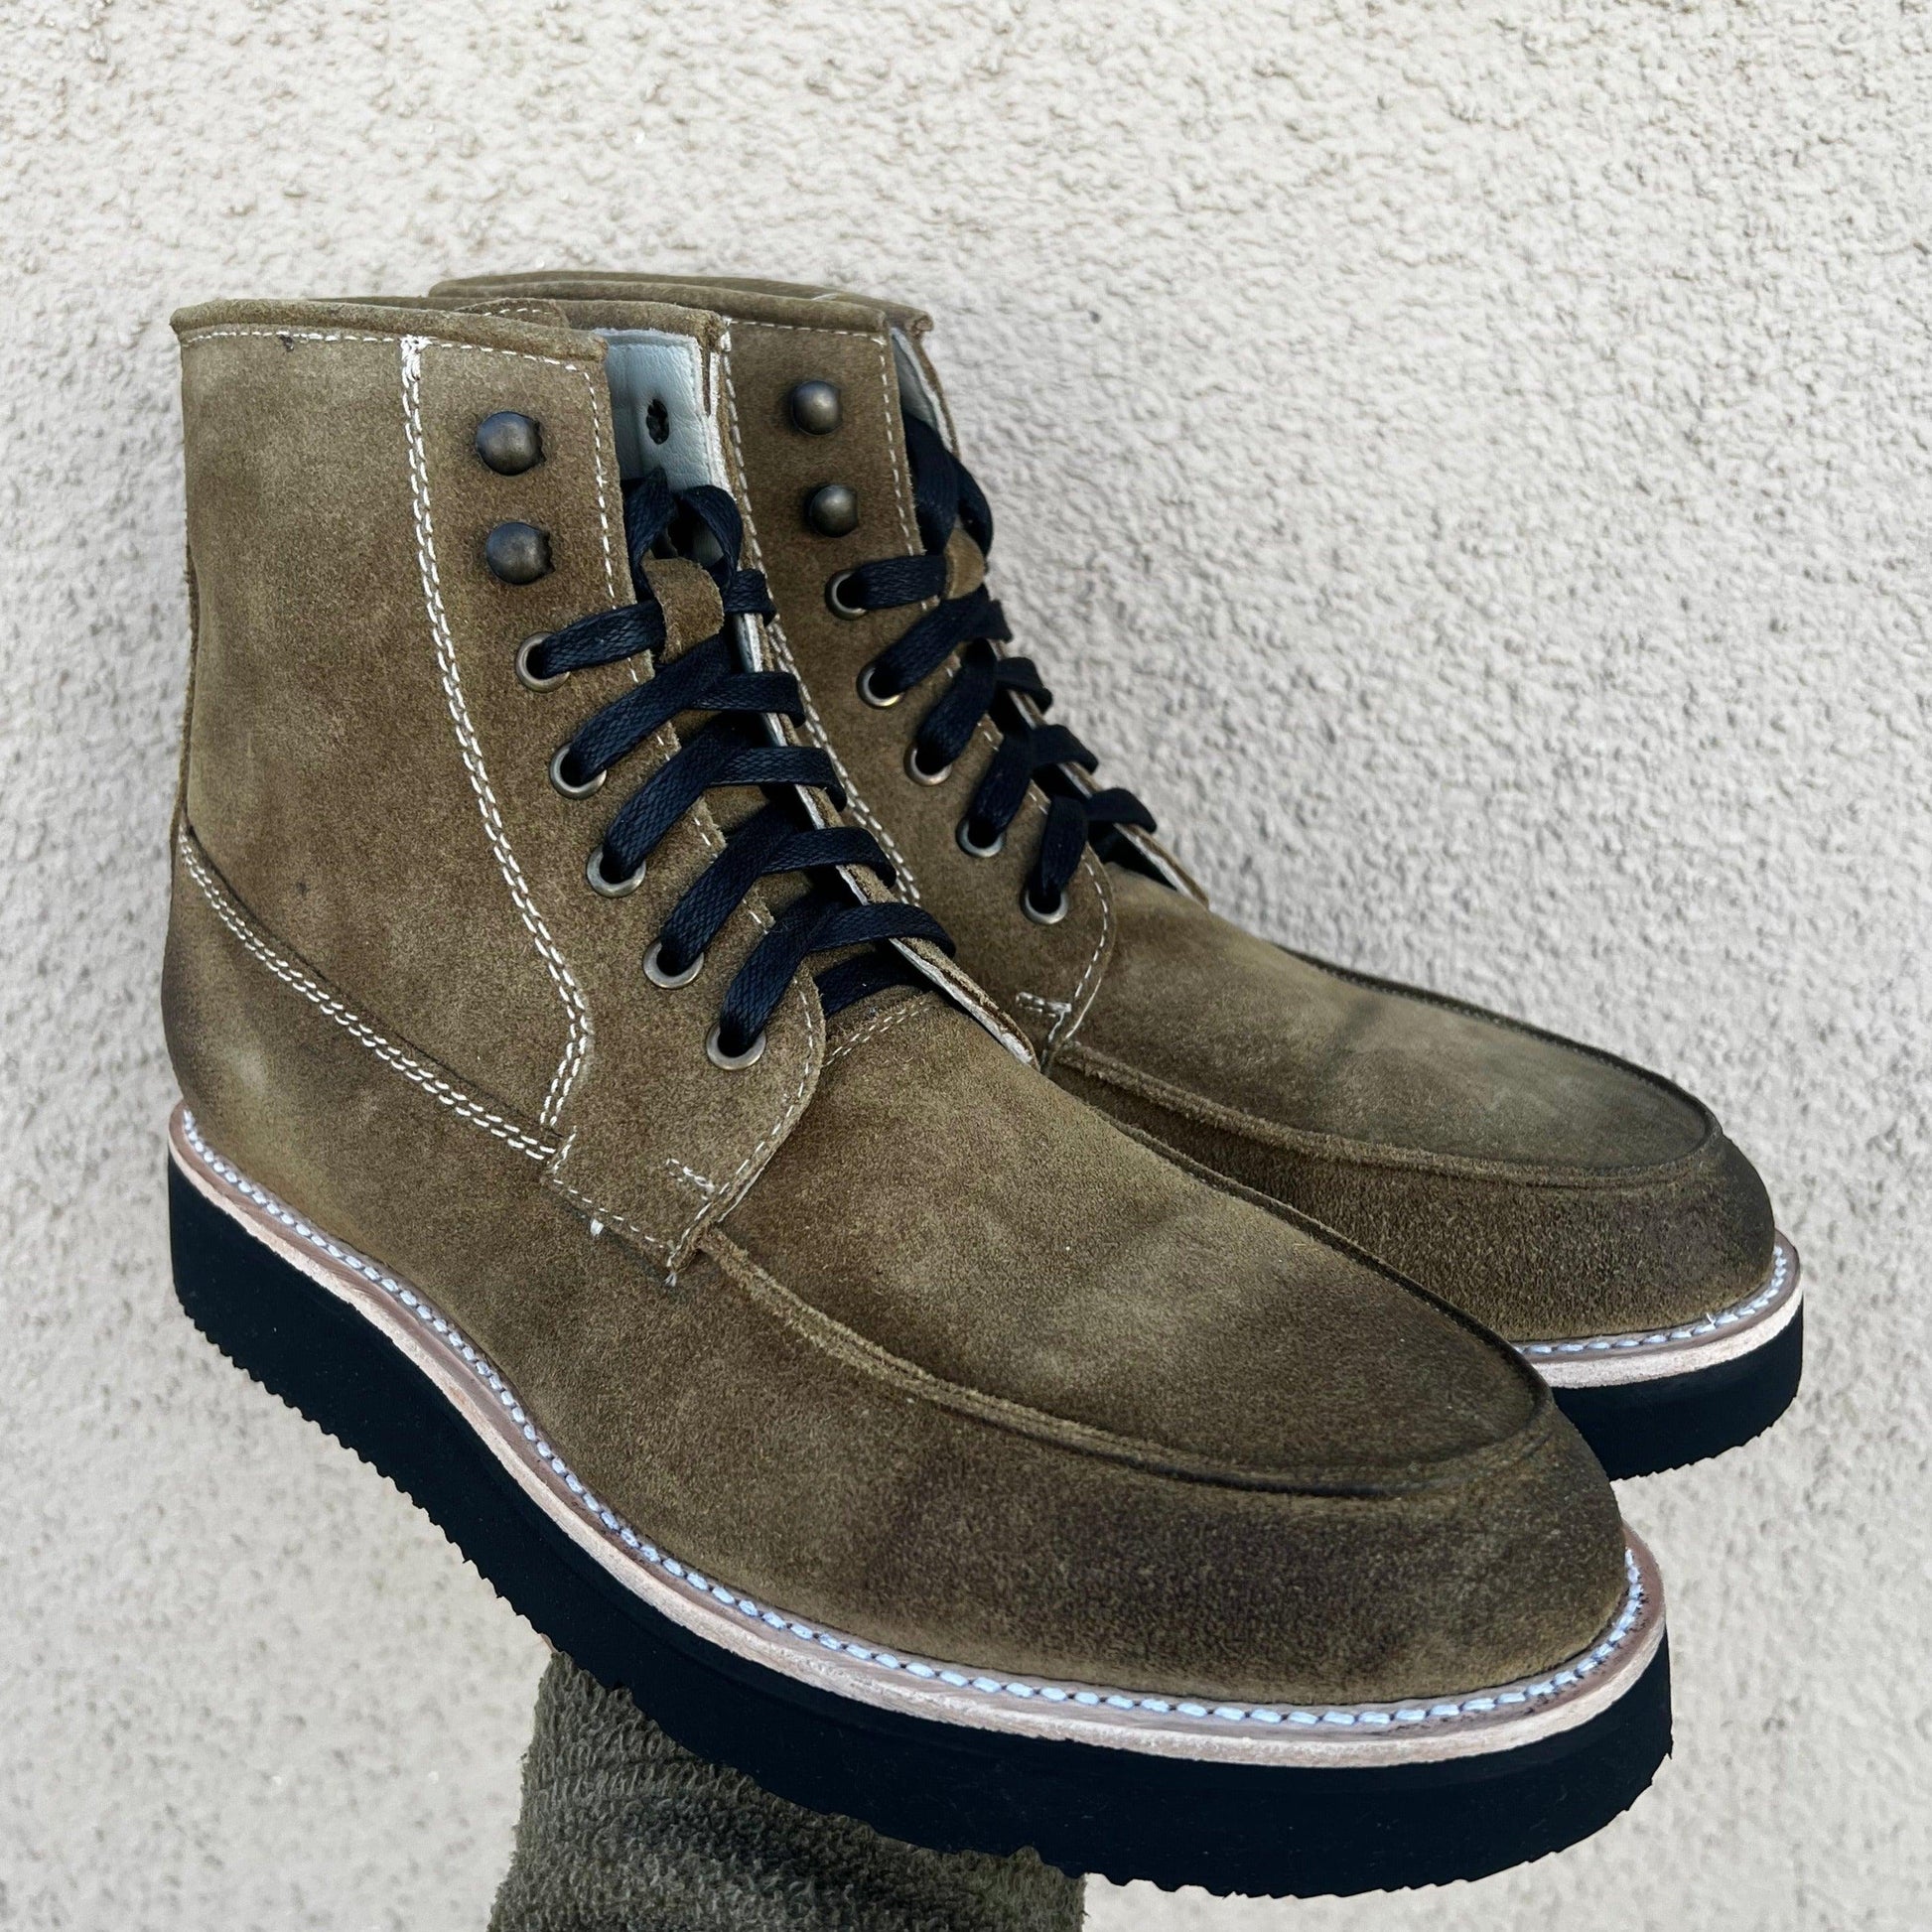 Waxed Suede Olive Nomad Size 9.5 Item #0795 - DIEVIER